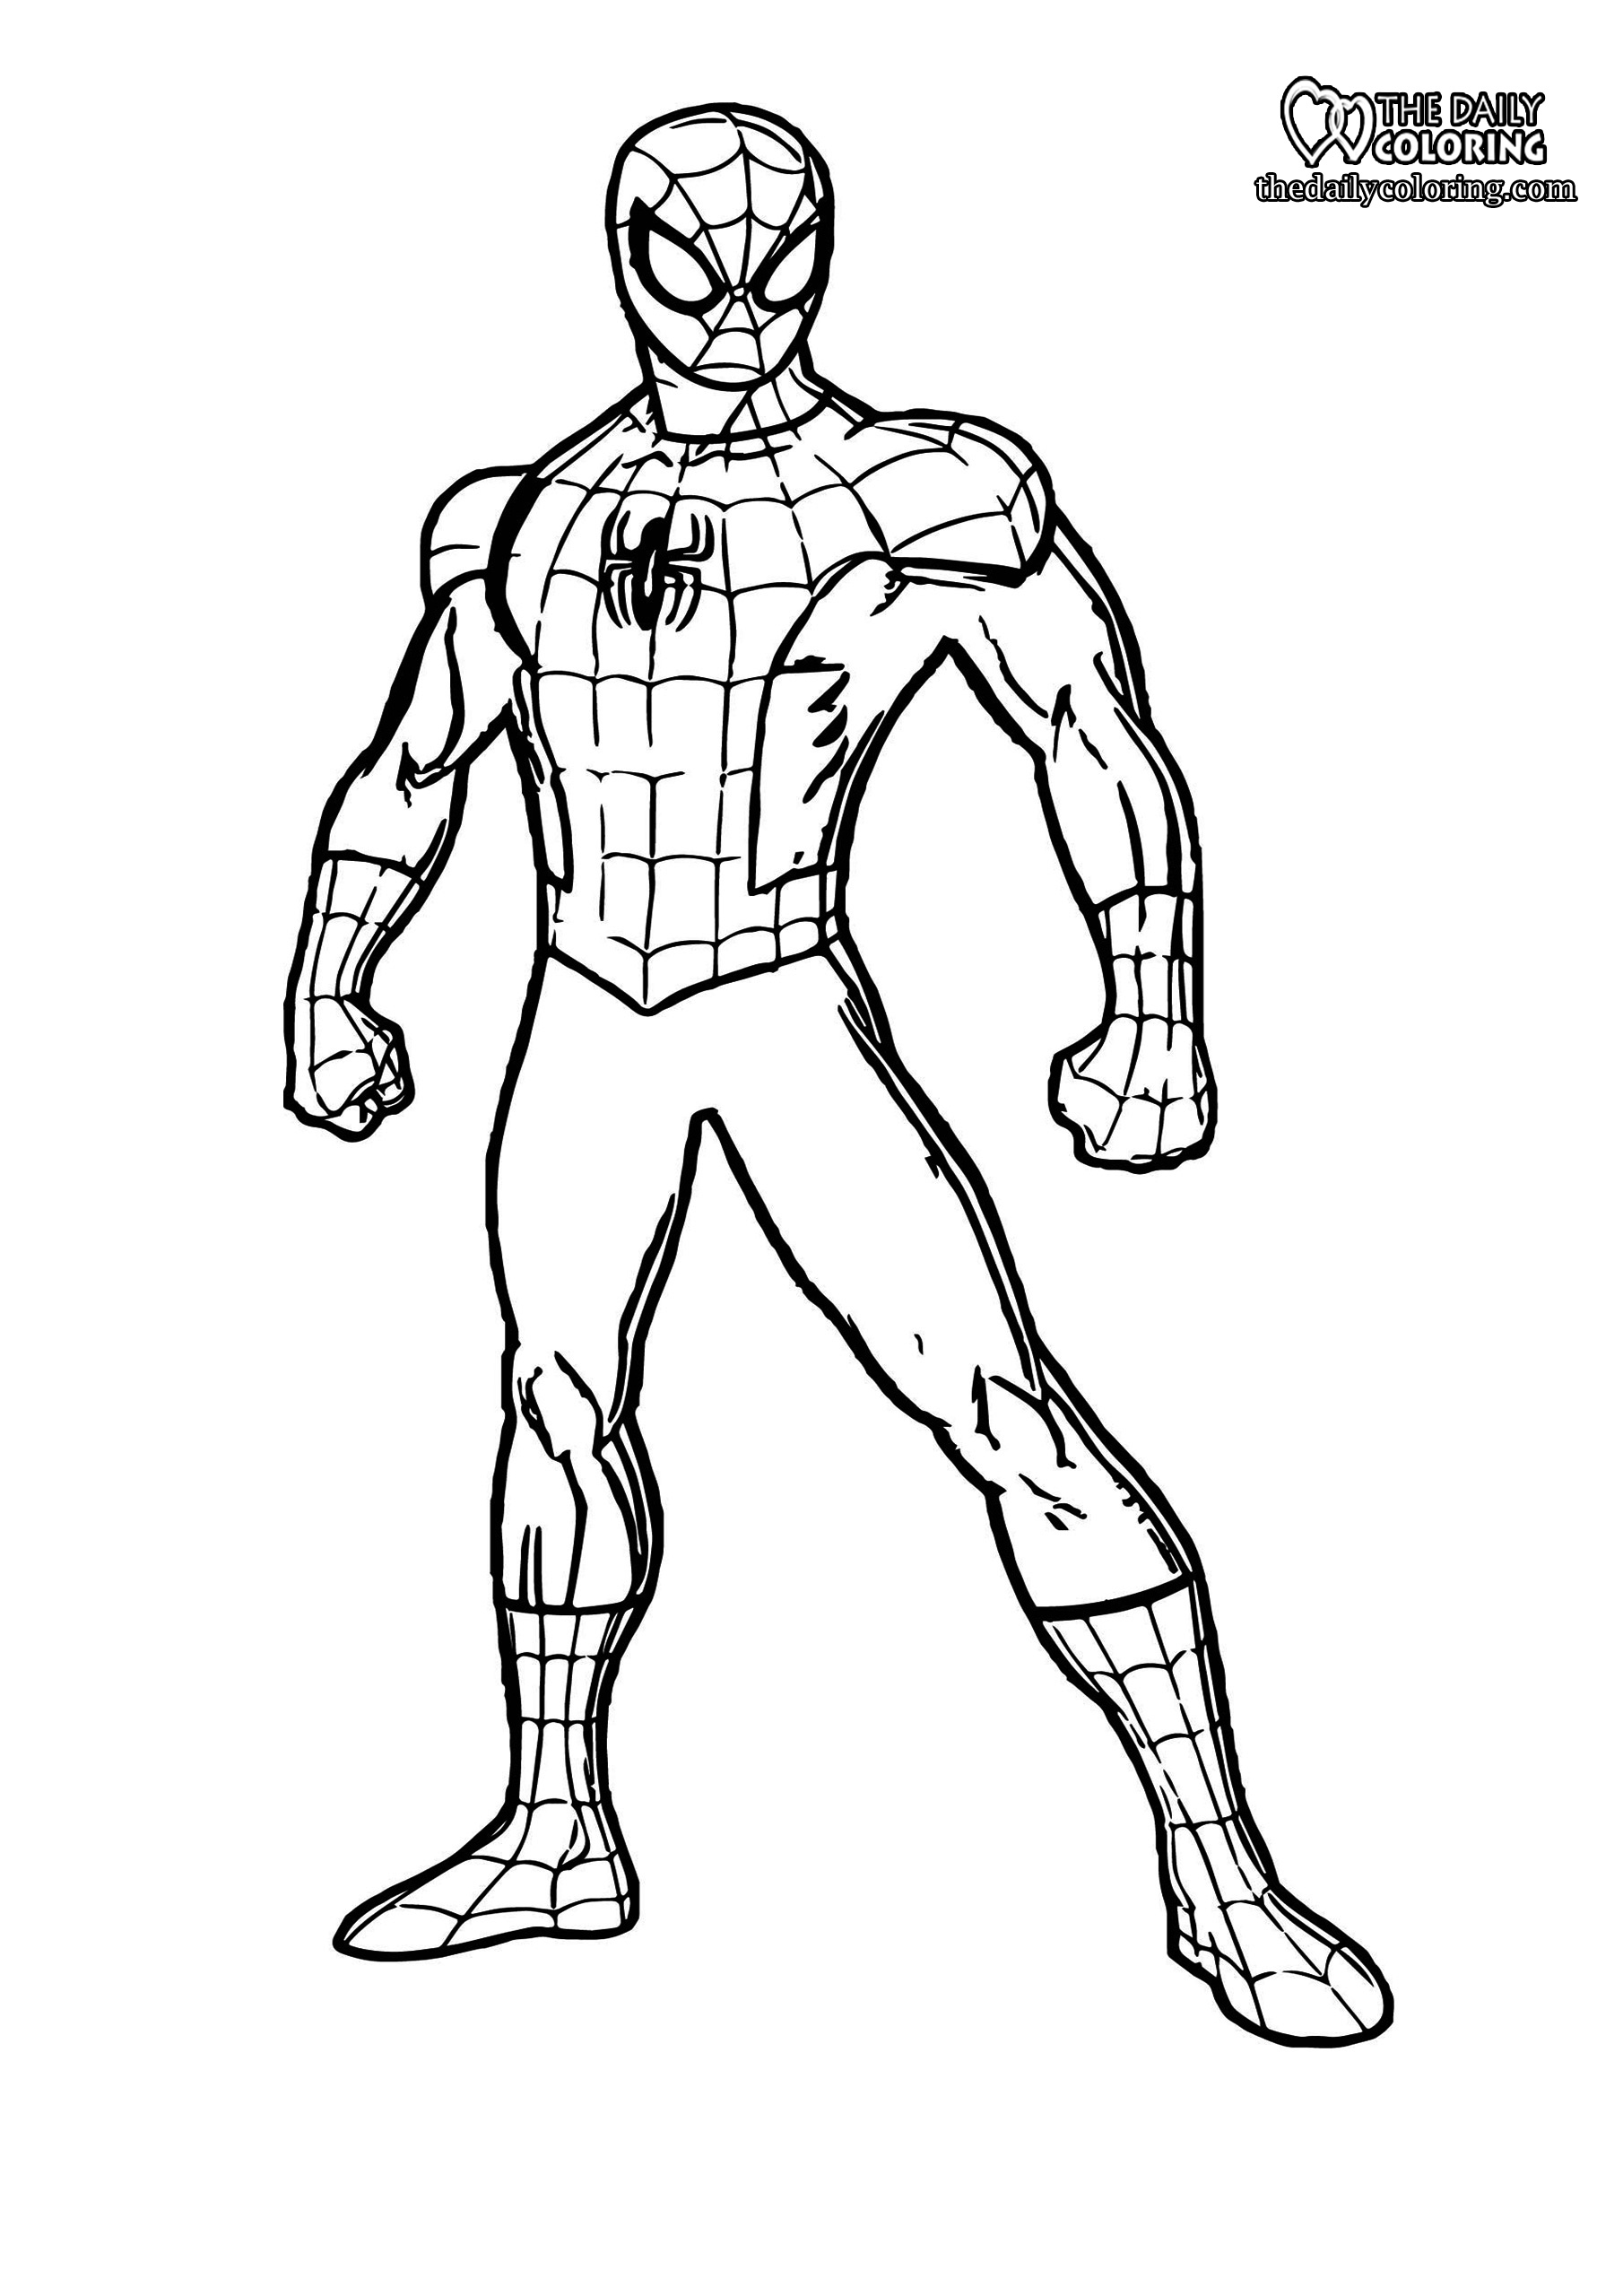 Spiderman Coloring Pages 20+ FULL HD   The Daily Coloring ...